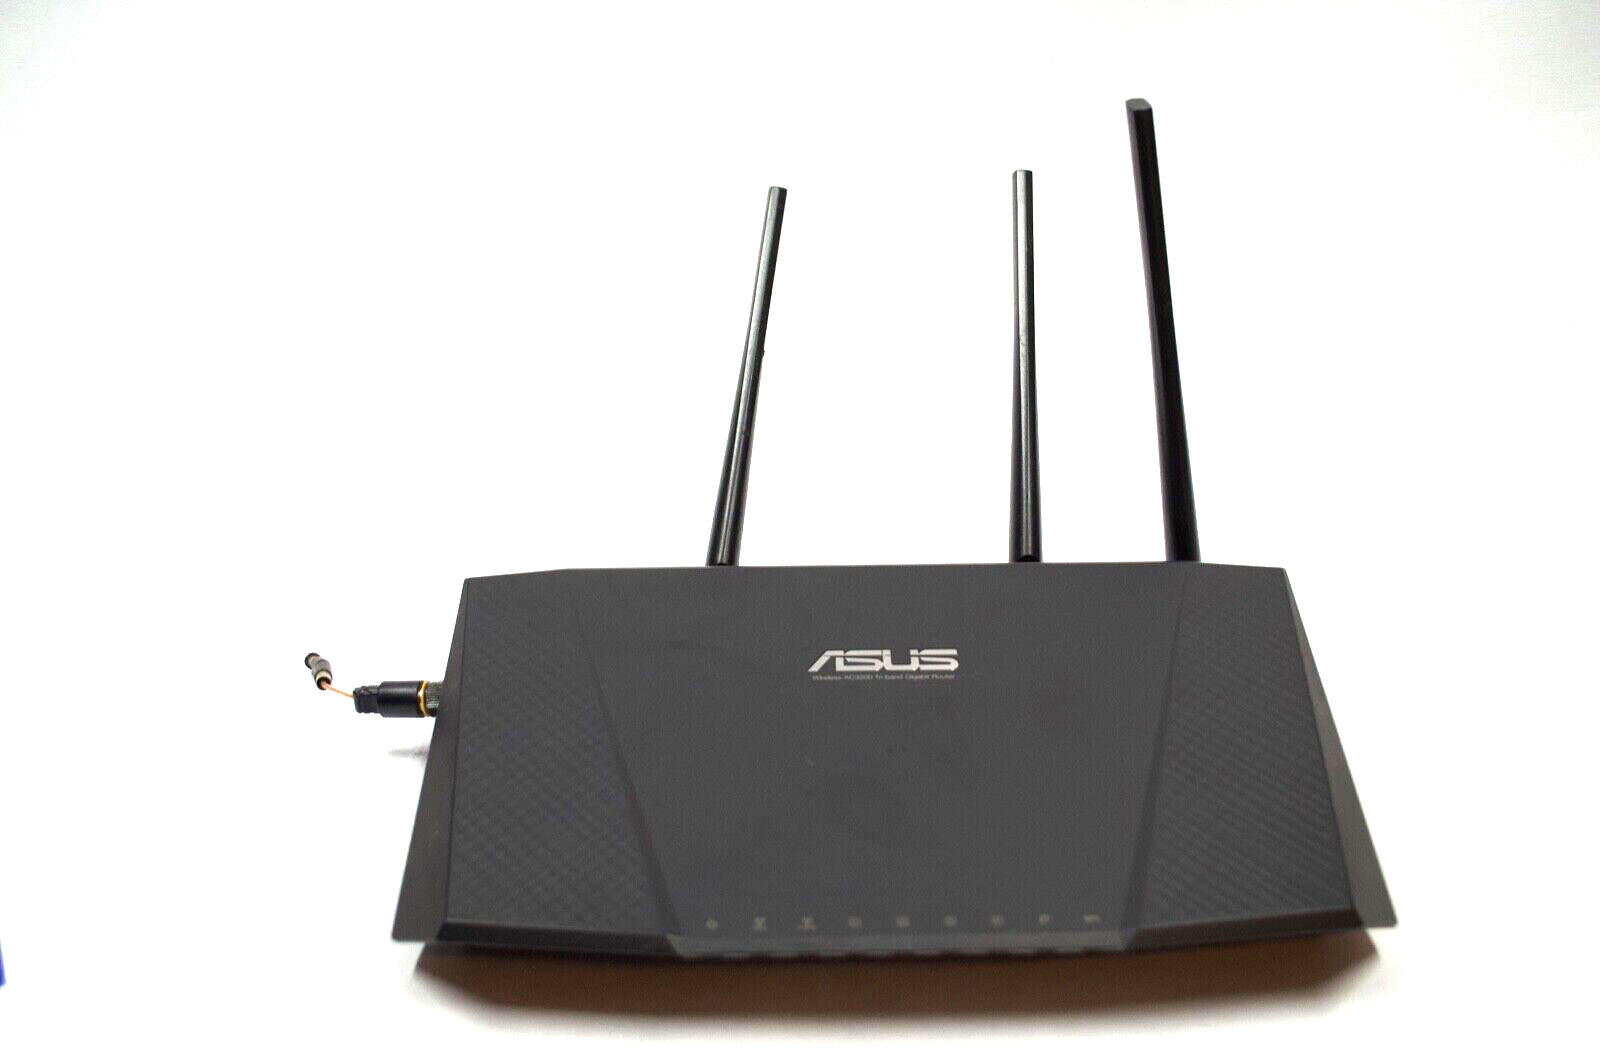 ASUS RT-AC3200 1300 Mbps 4 Port Tri-Band Wireless Router (RT-AC3200) Y9